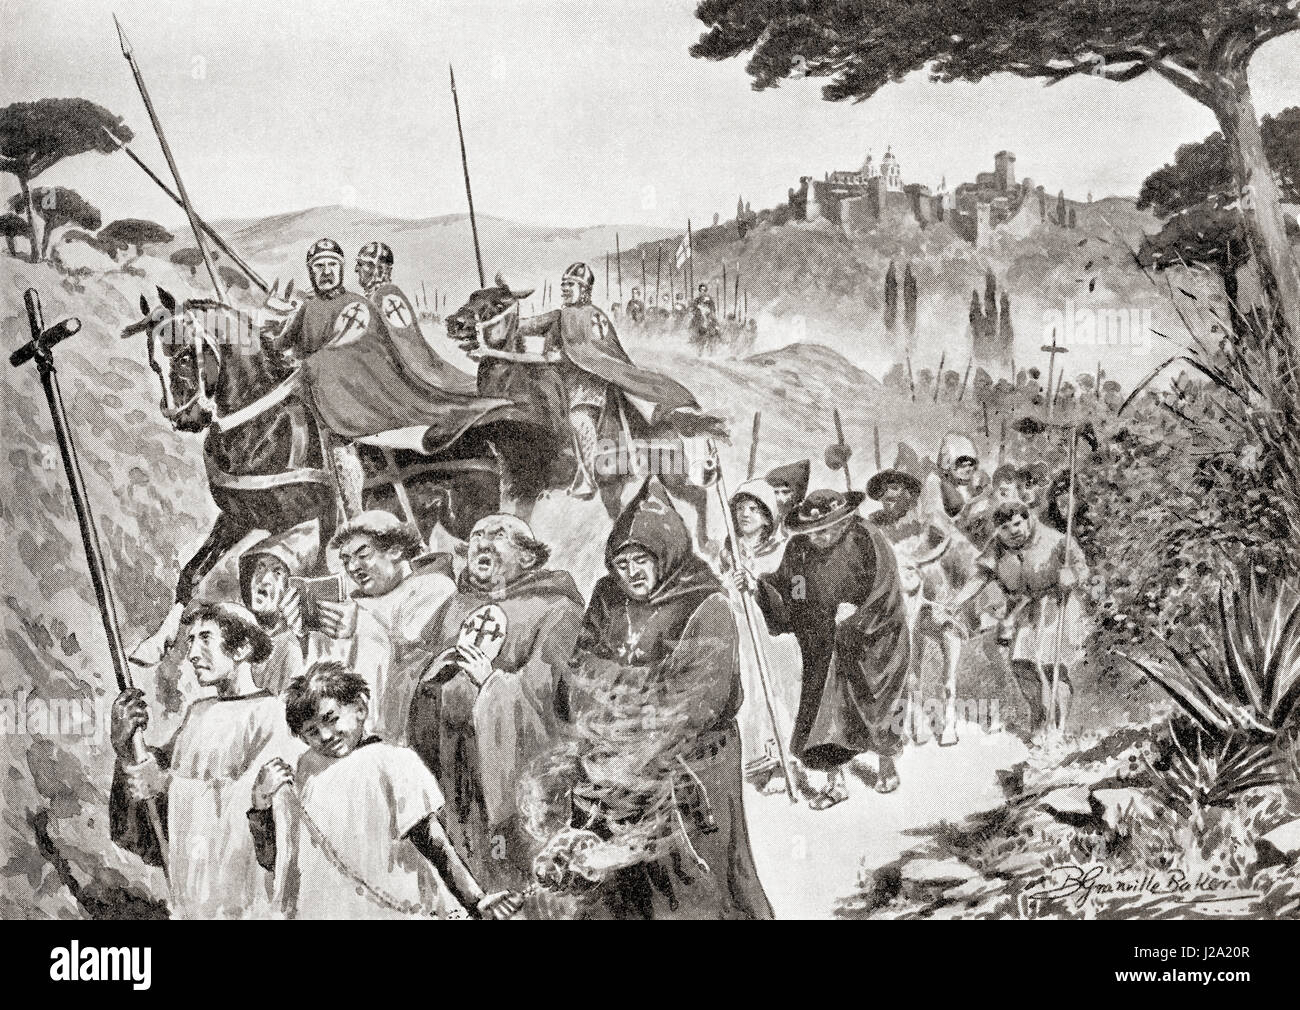 A pilgrimage to Santiago de Compostela, Spain in the middle ages.   After the painting by Bernard Granville Baker (1870 - 1957). From Hutchinson's History of the Nations, published 1915. Stock Photo